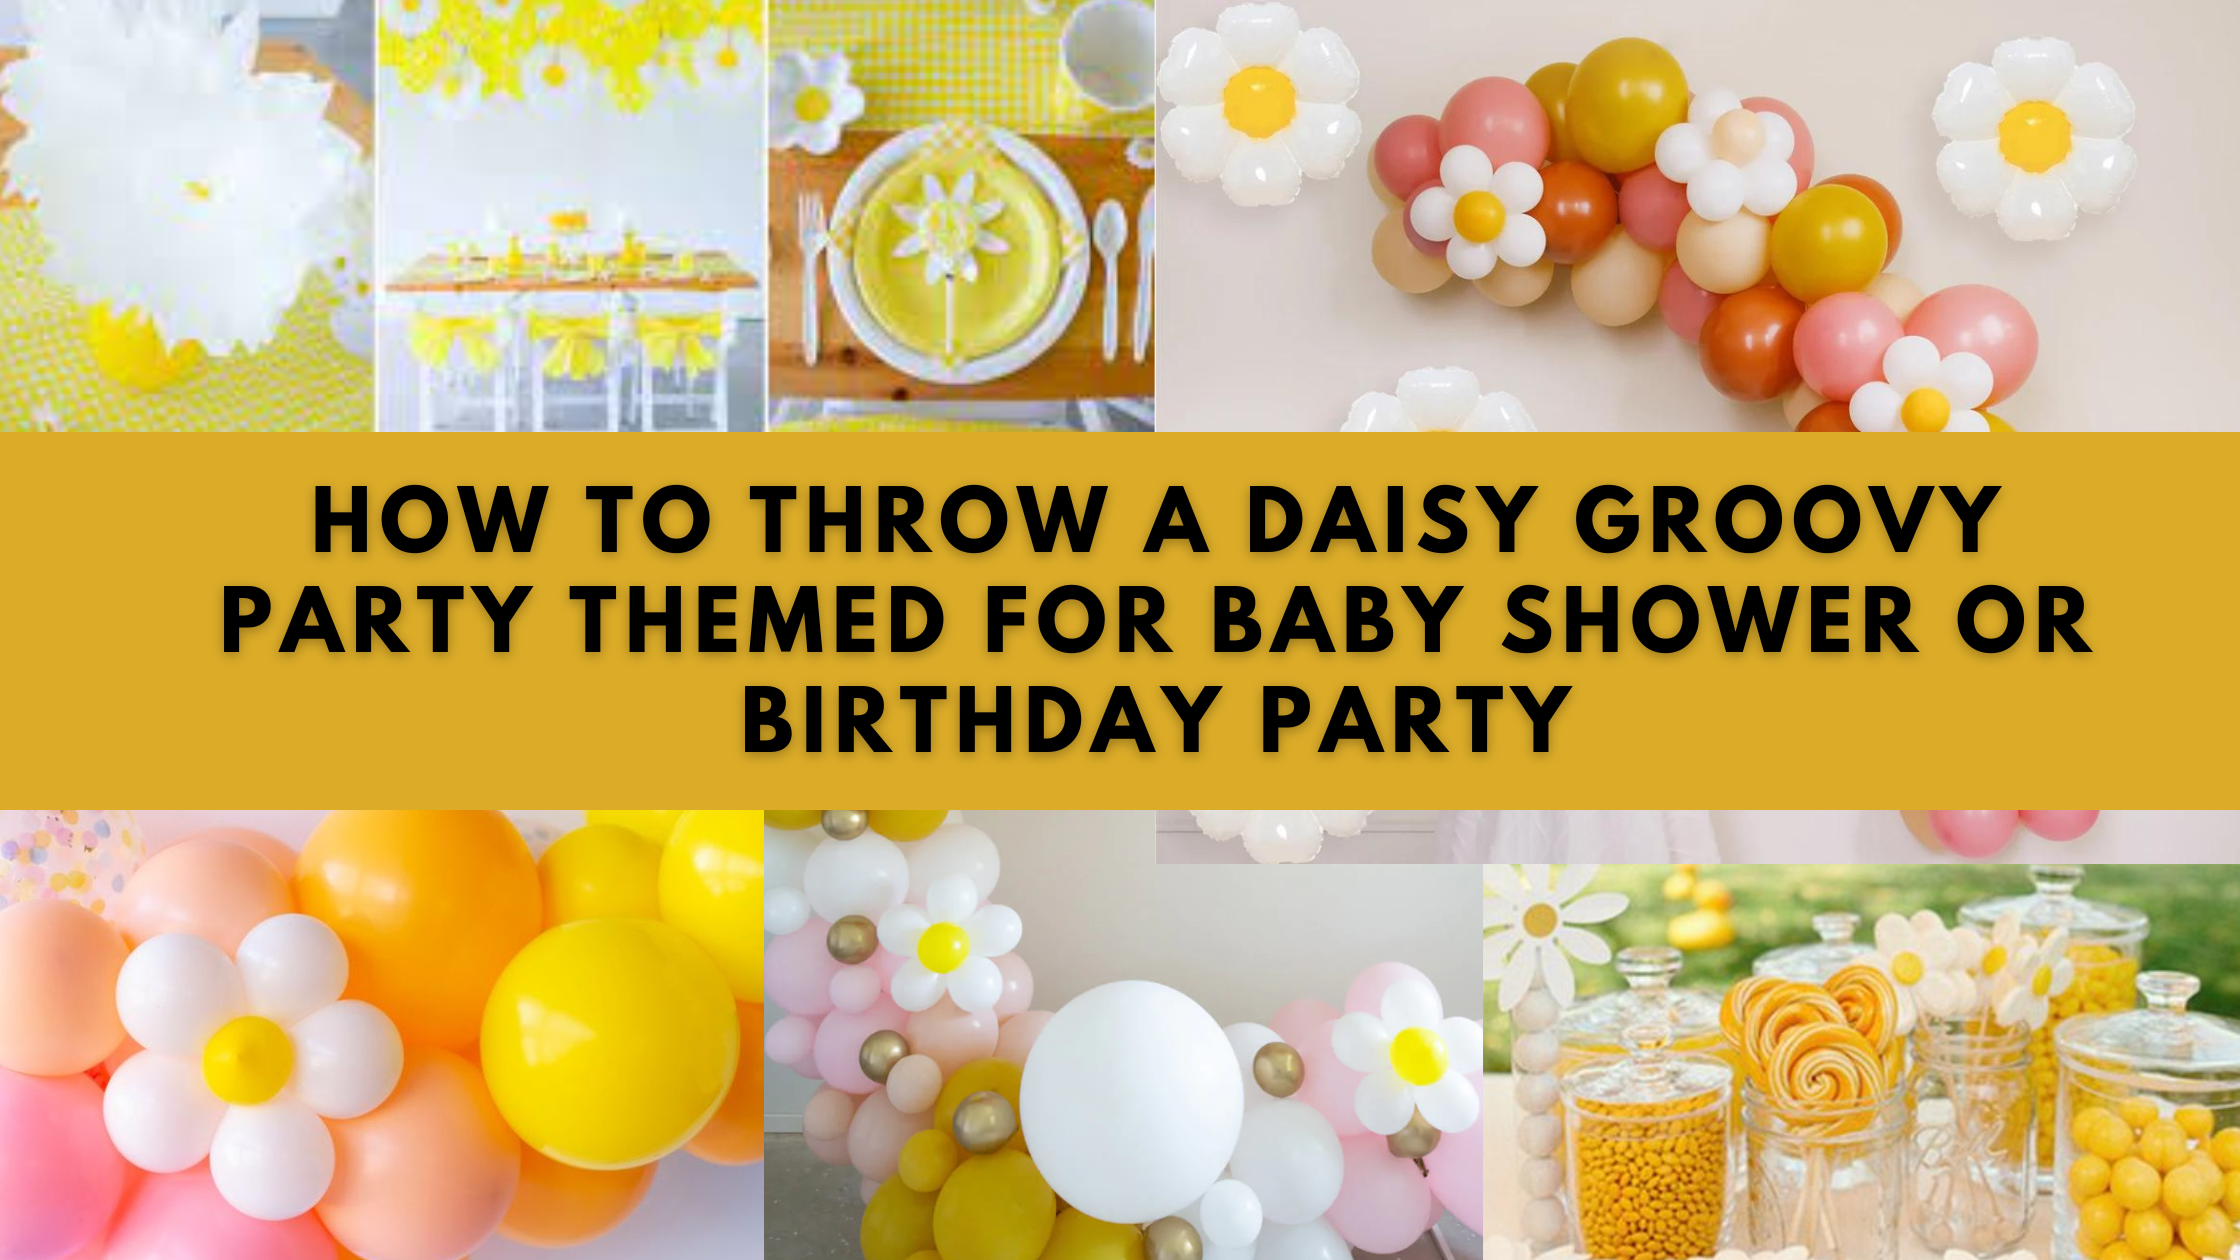 How to Throw a Daisy Groovy Party Themed for Baby Shower or Birthday Party